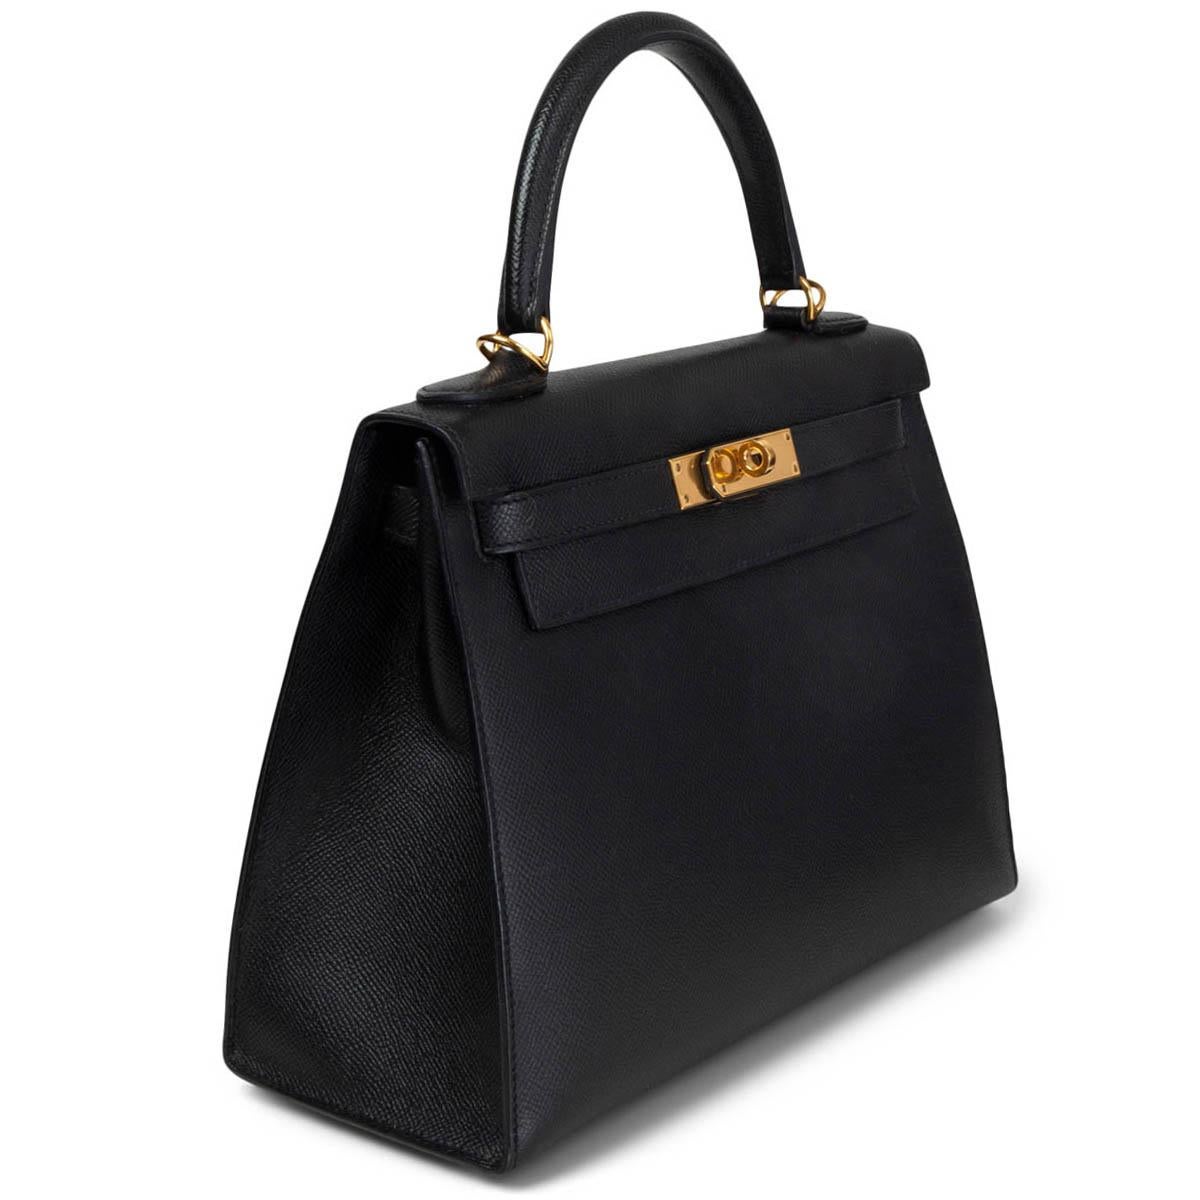 100% authentic Hermès Kelly 28 shoulder bag in black Veau Epsom featuring gold-tone Palladium hardware. Has been carried and is in excellent condition. Comes with full set. 

Measurements
Height	22cm (8.6in)
Width	28cm (10.9in)
Depth	11cm